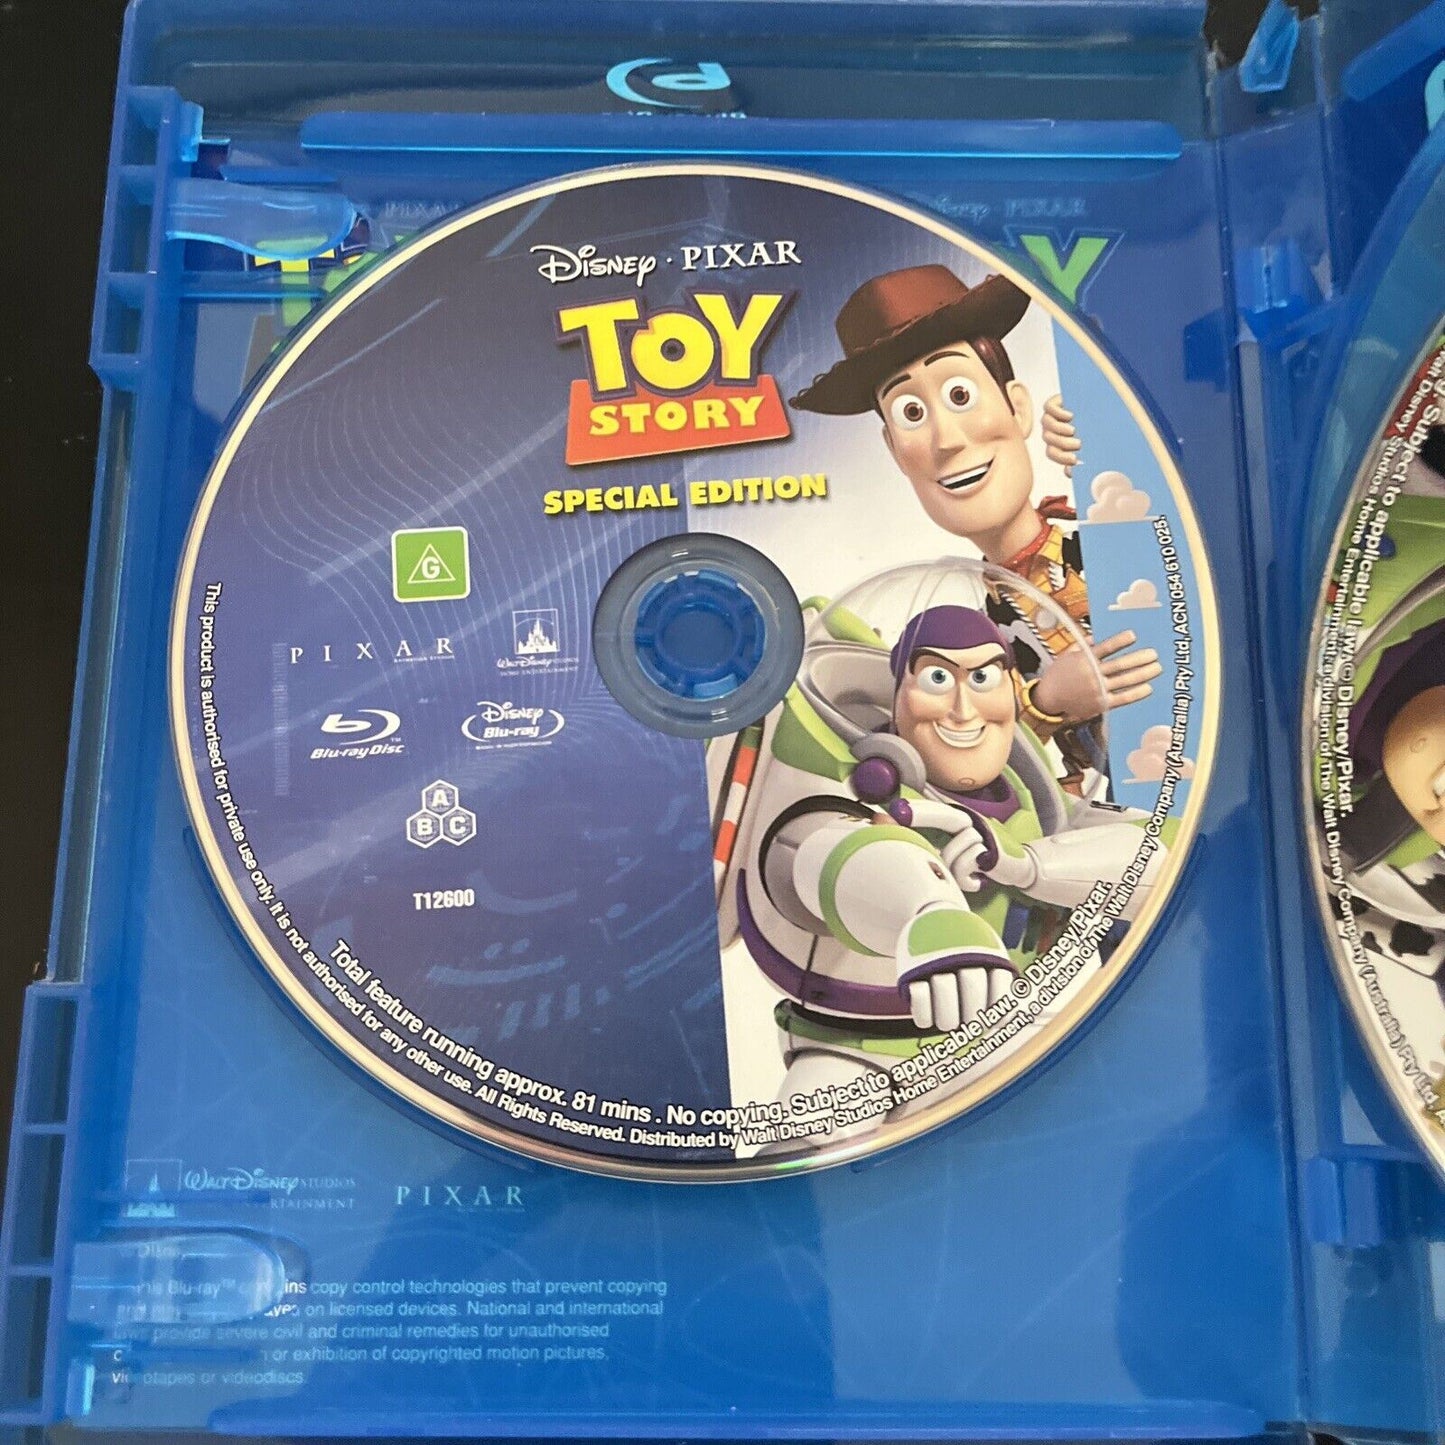 The Complete 3D Toy Story Collection 1 2 3 - Blu-Ray 3D Like New